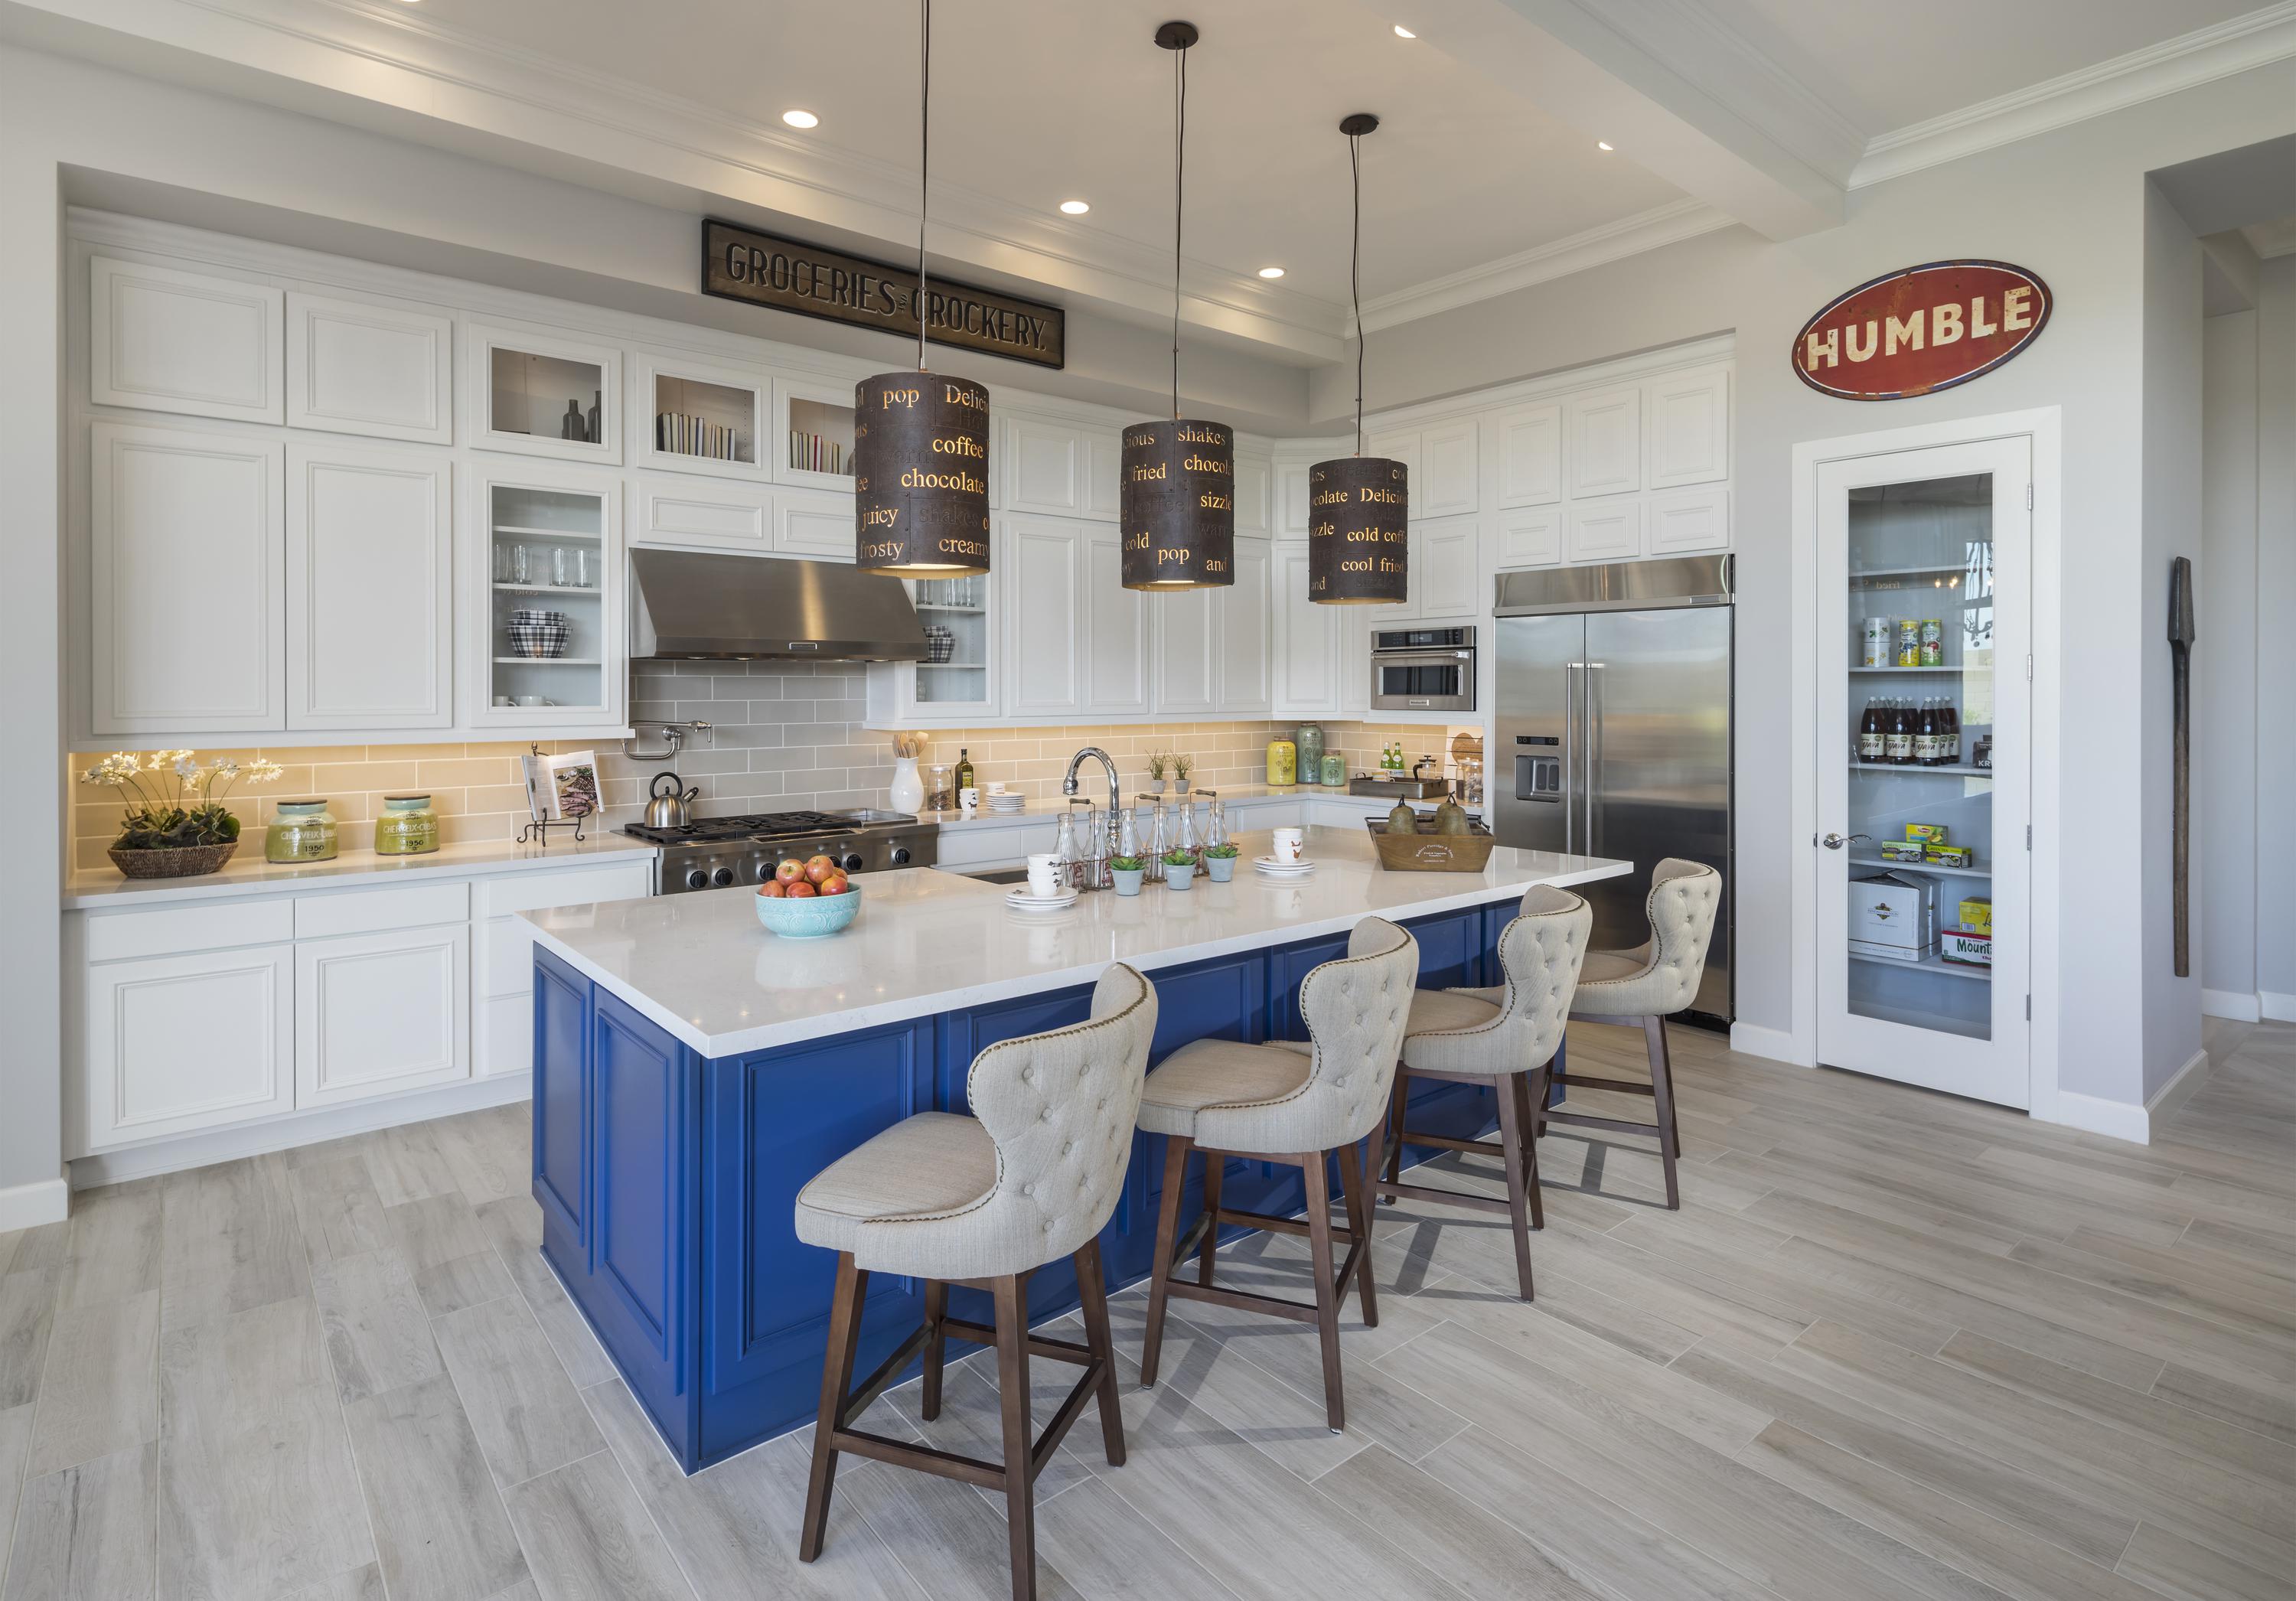 33 BLUE KITCHEN ISLAND IDEAS | STUNNING TRENDS YOU CAN APPLY AT YOUR HOME